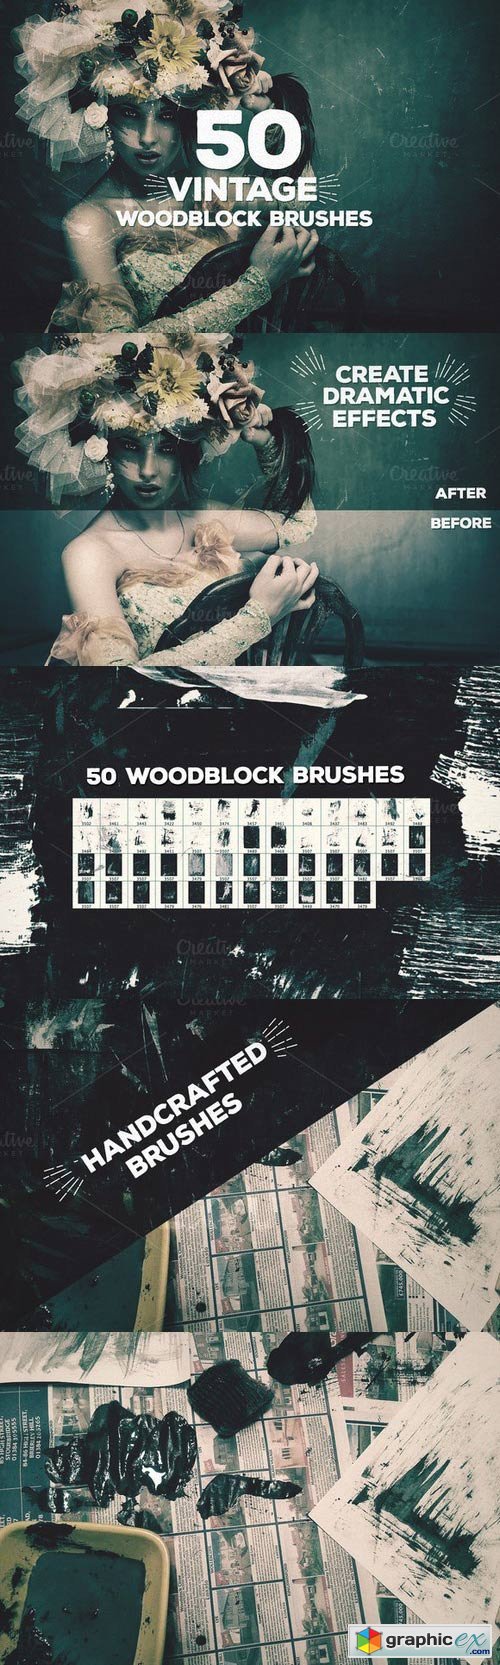 50 Vintage Woodblock Brushes by Layerform